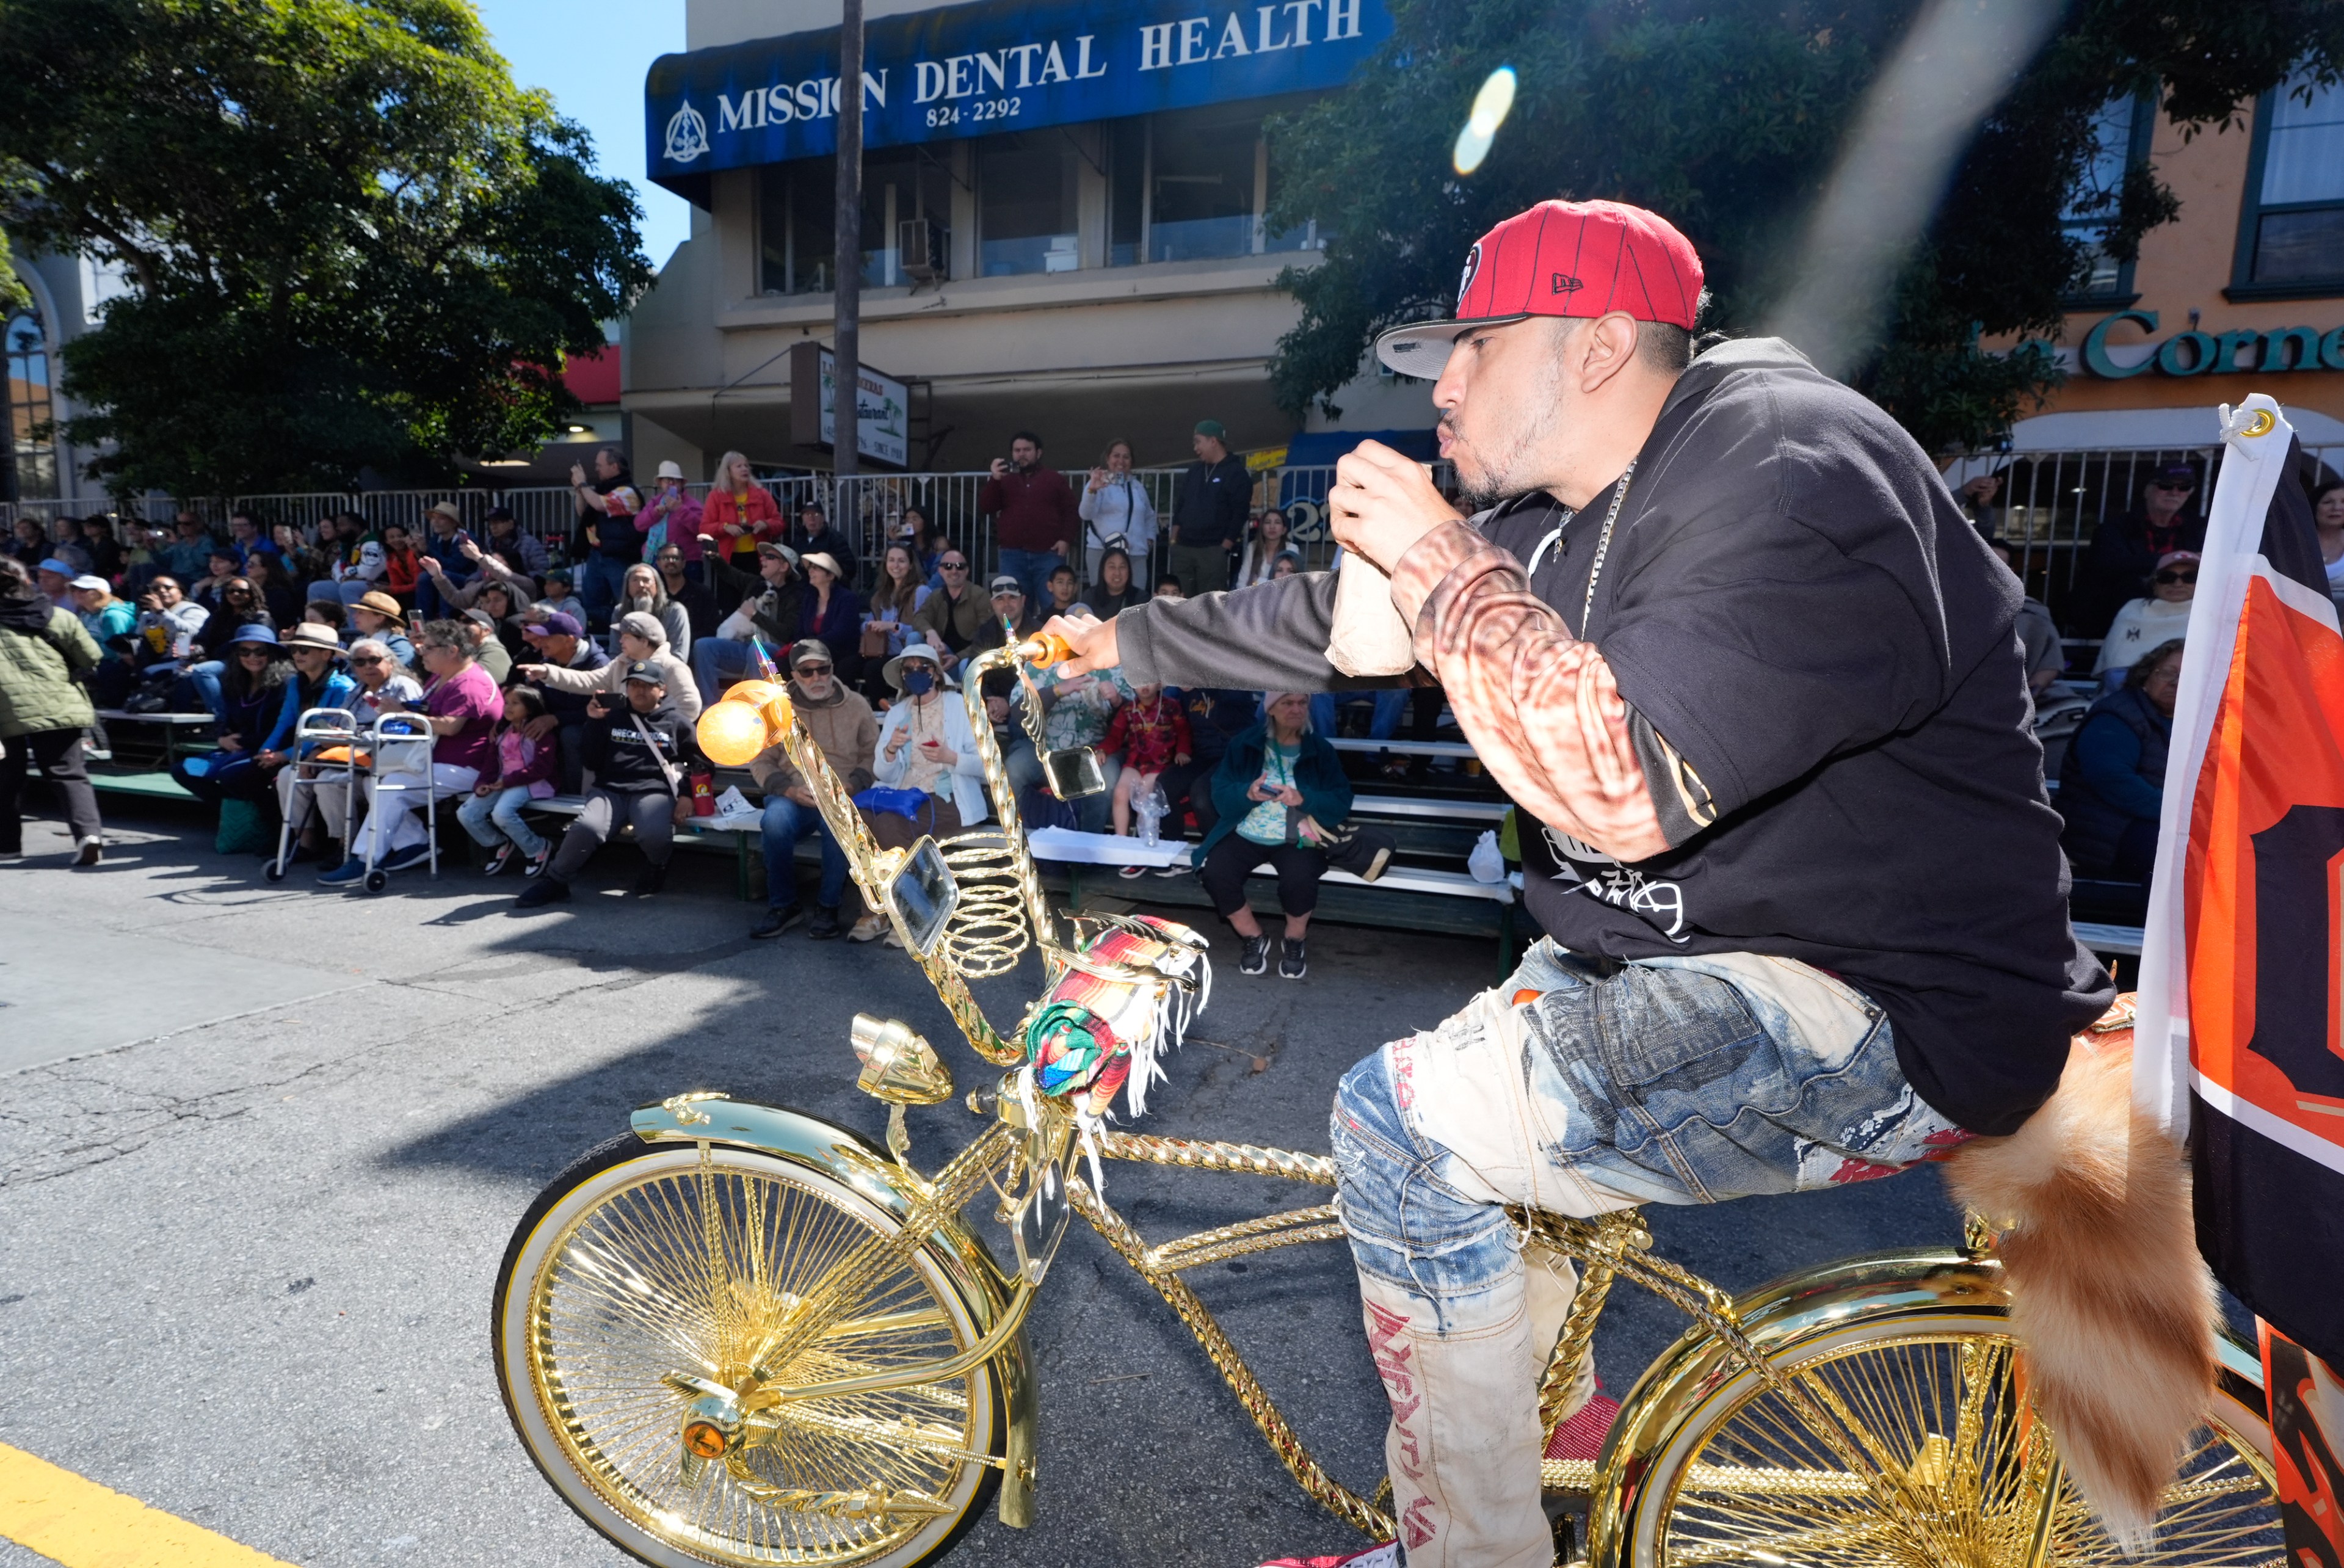 A man in a red cap and jeans rides a shiny gold bicycle past a seated crowd on city streets during a parade. The crowd watches attentively on a sunny day.